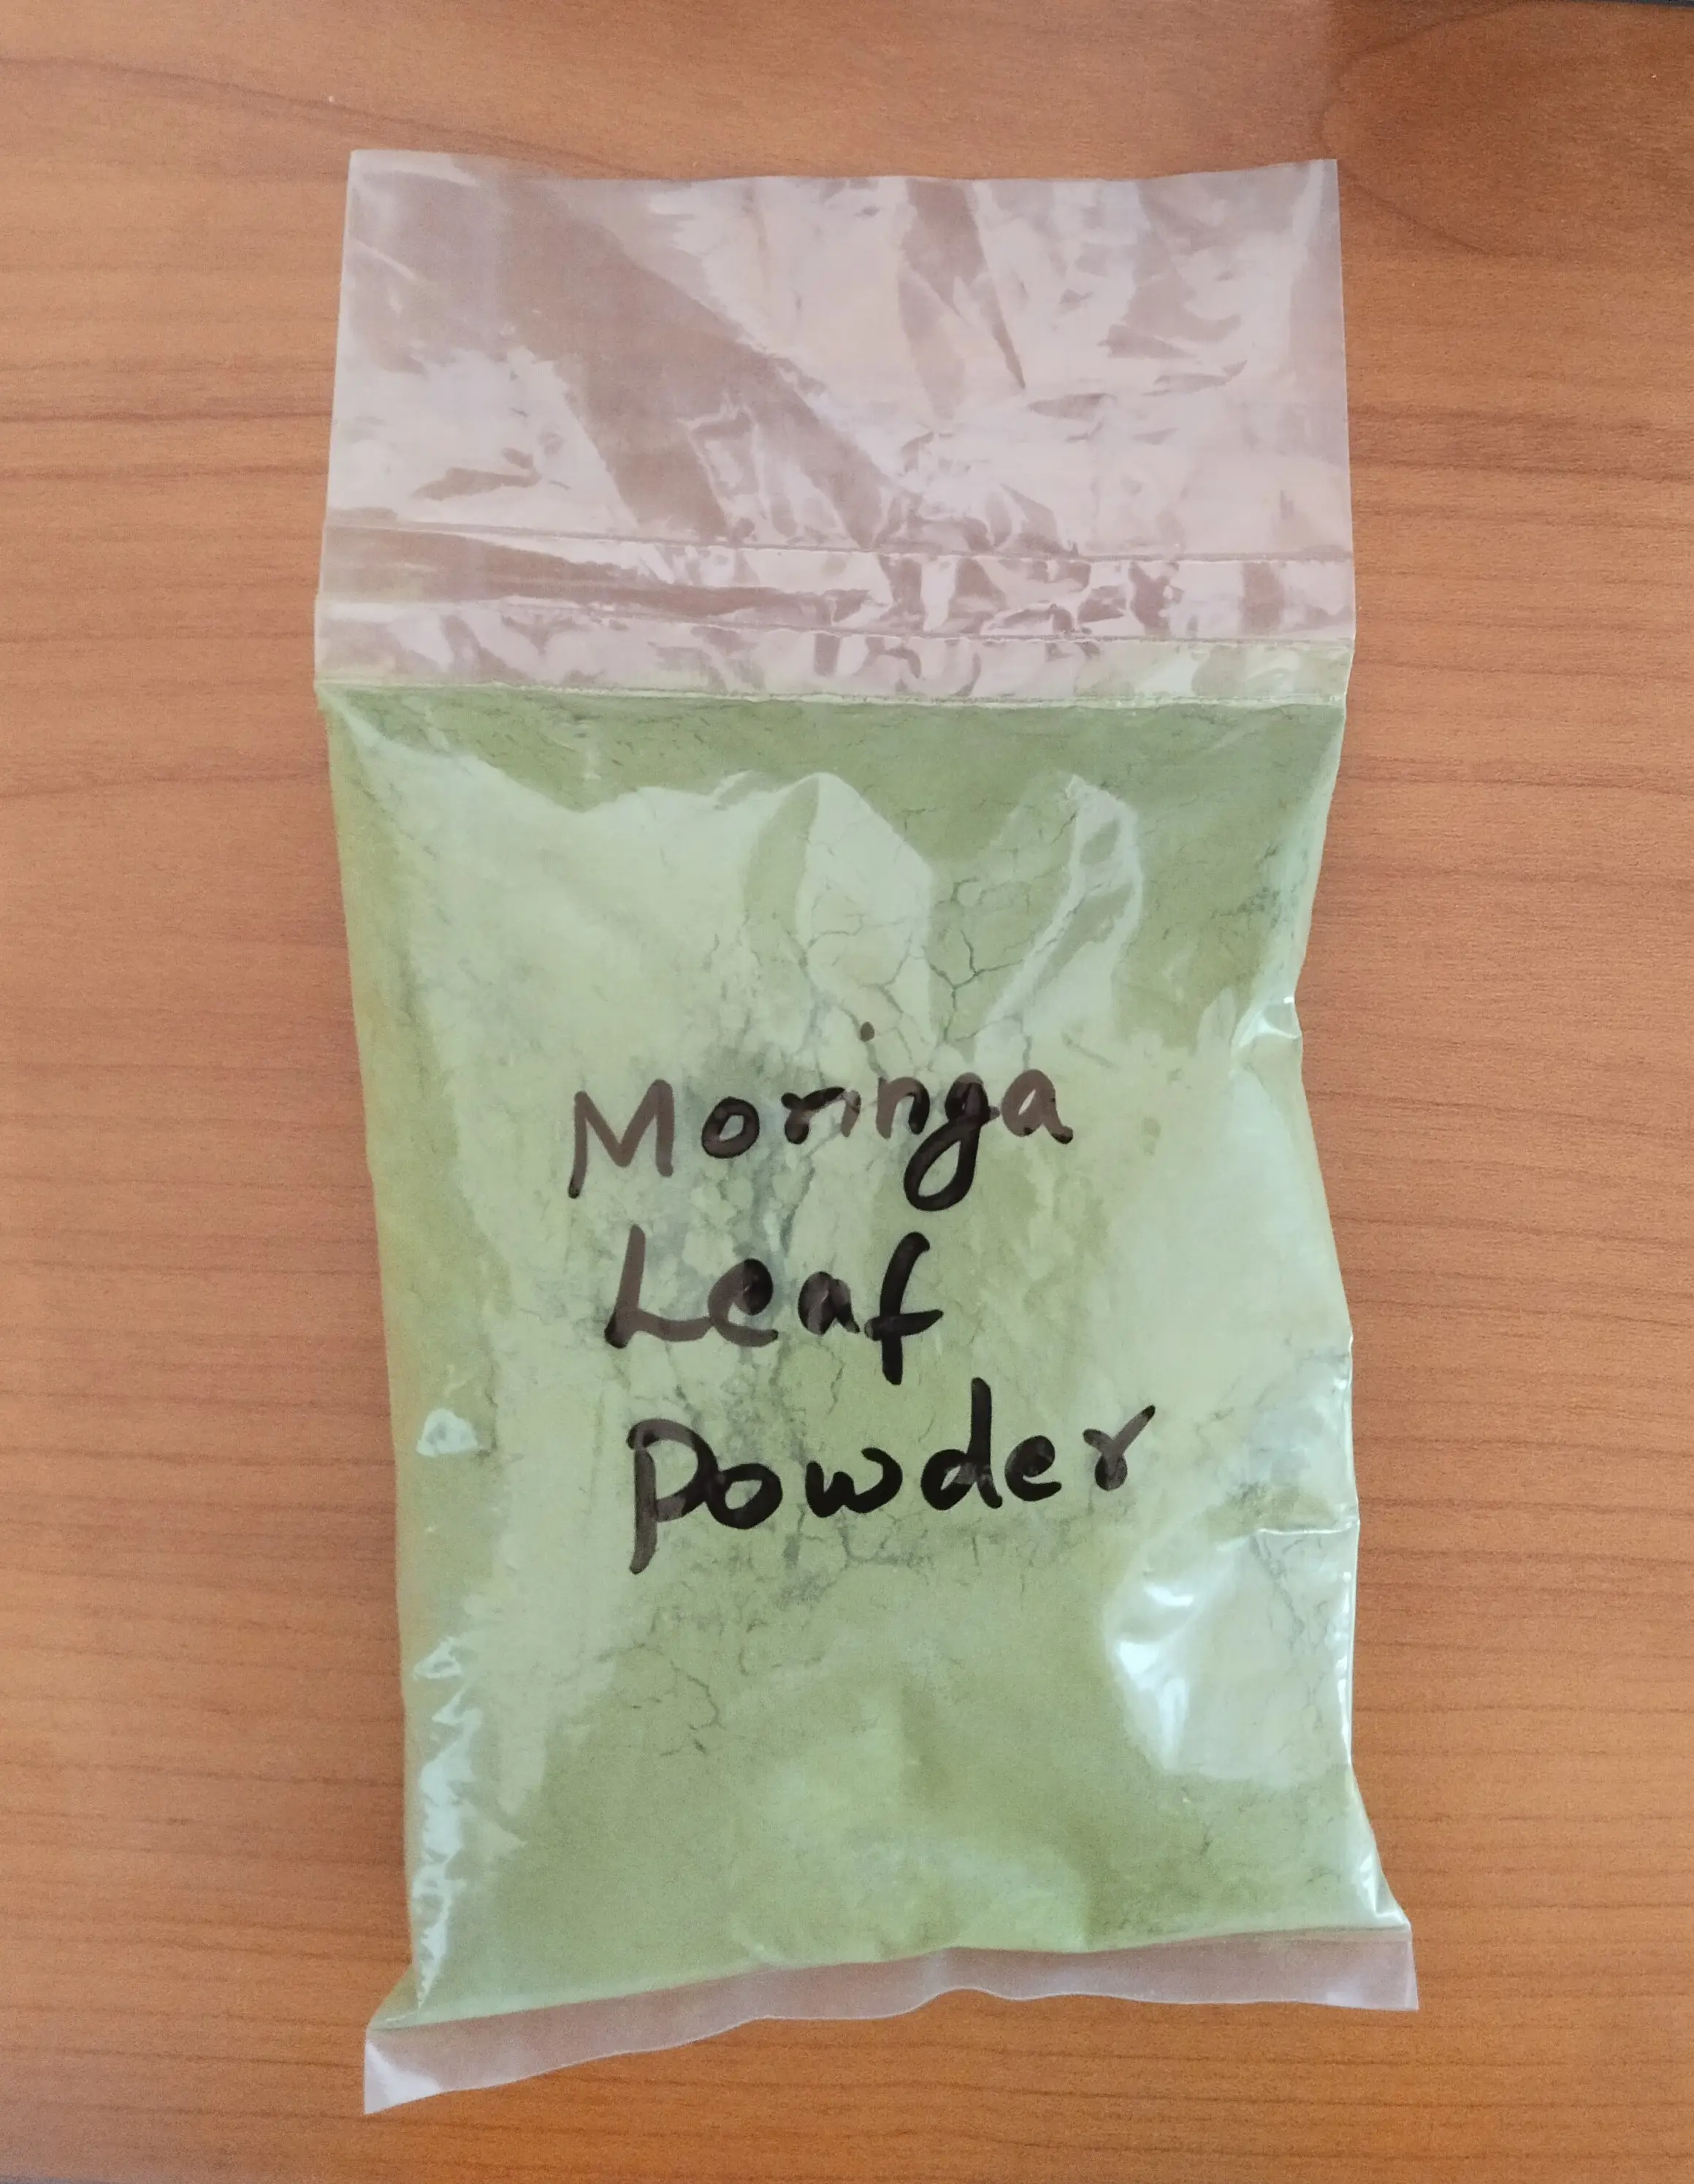 Best Selling Moringa Leaf Powder From India 100% Pure Organic and Healthy Use Powder Wholesale Supplier At Affordable Price